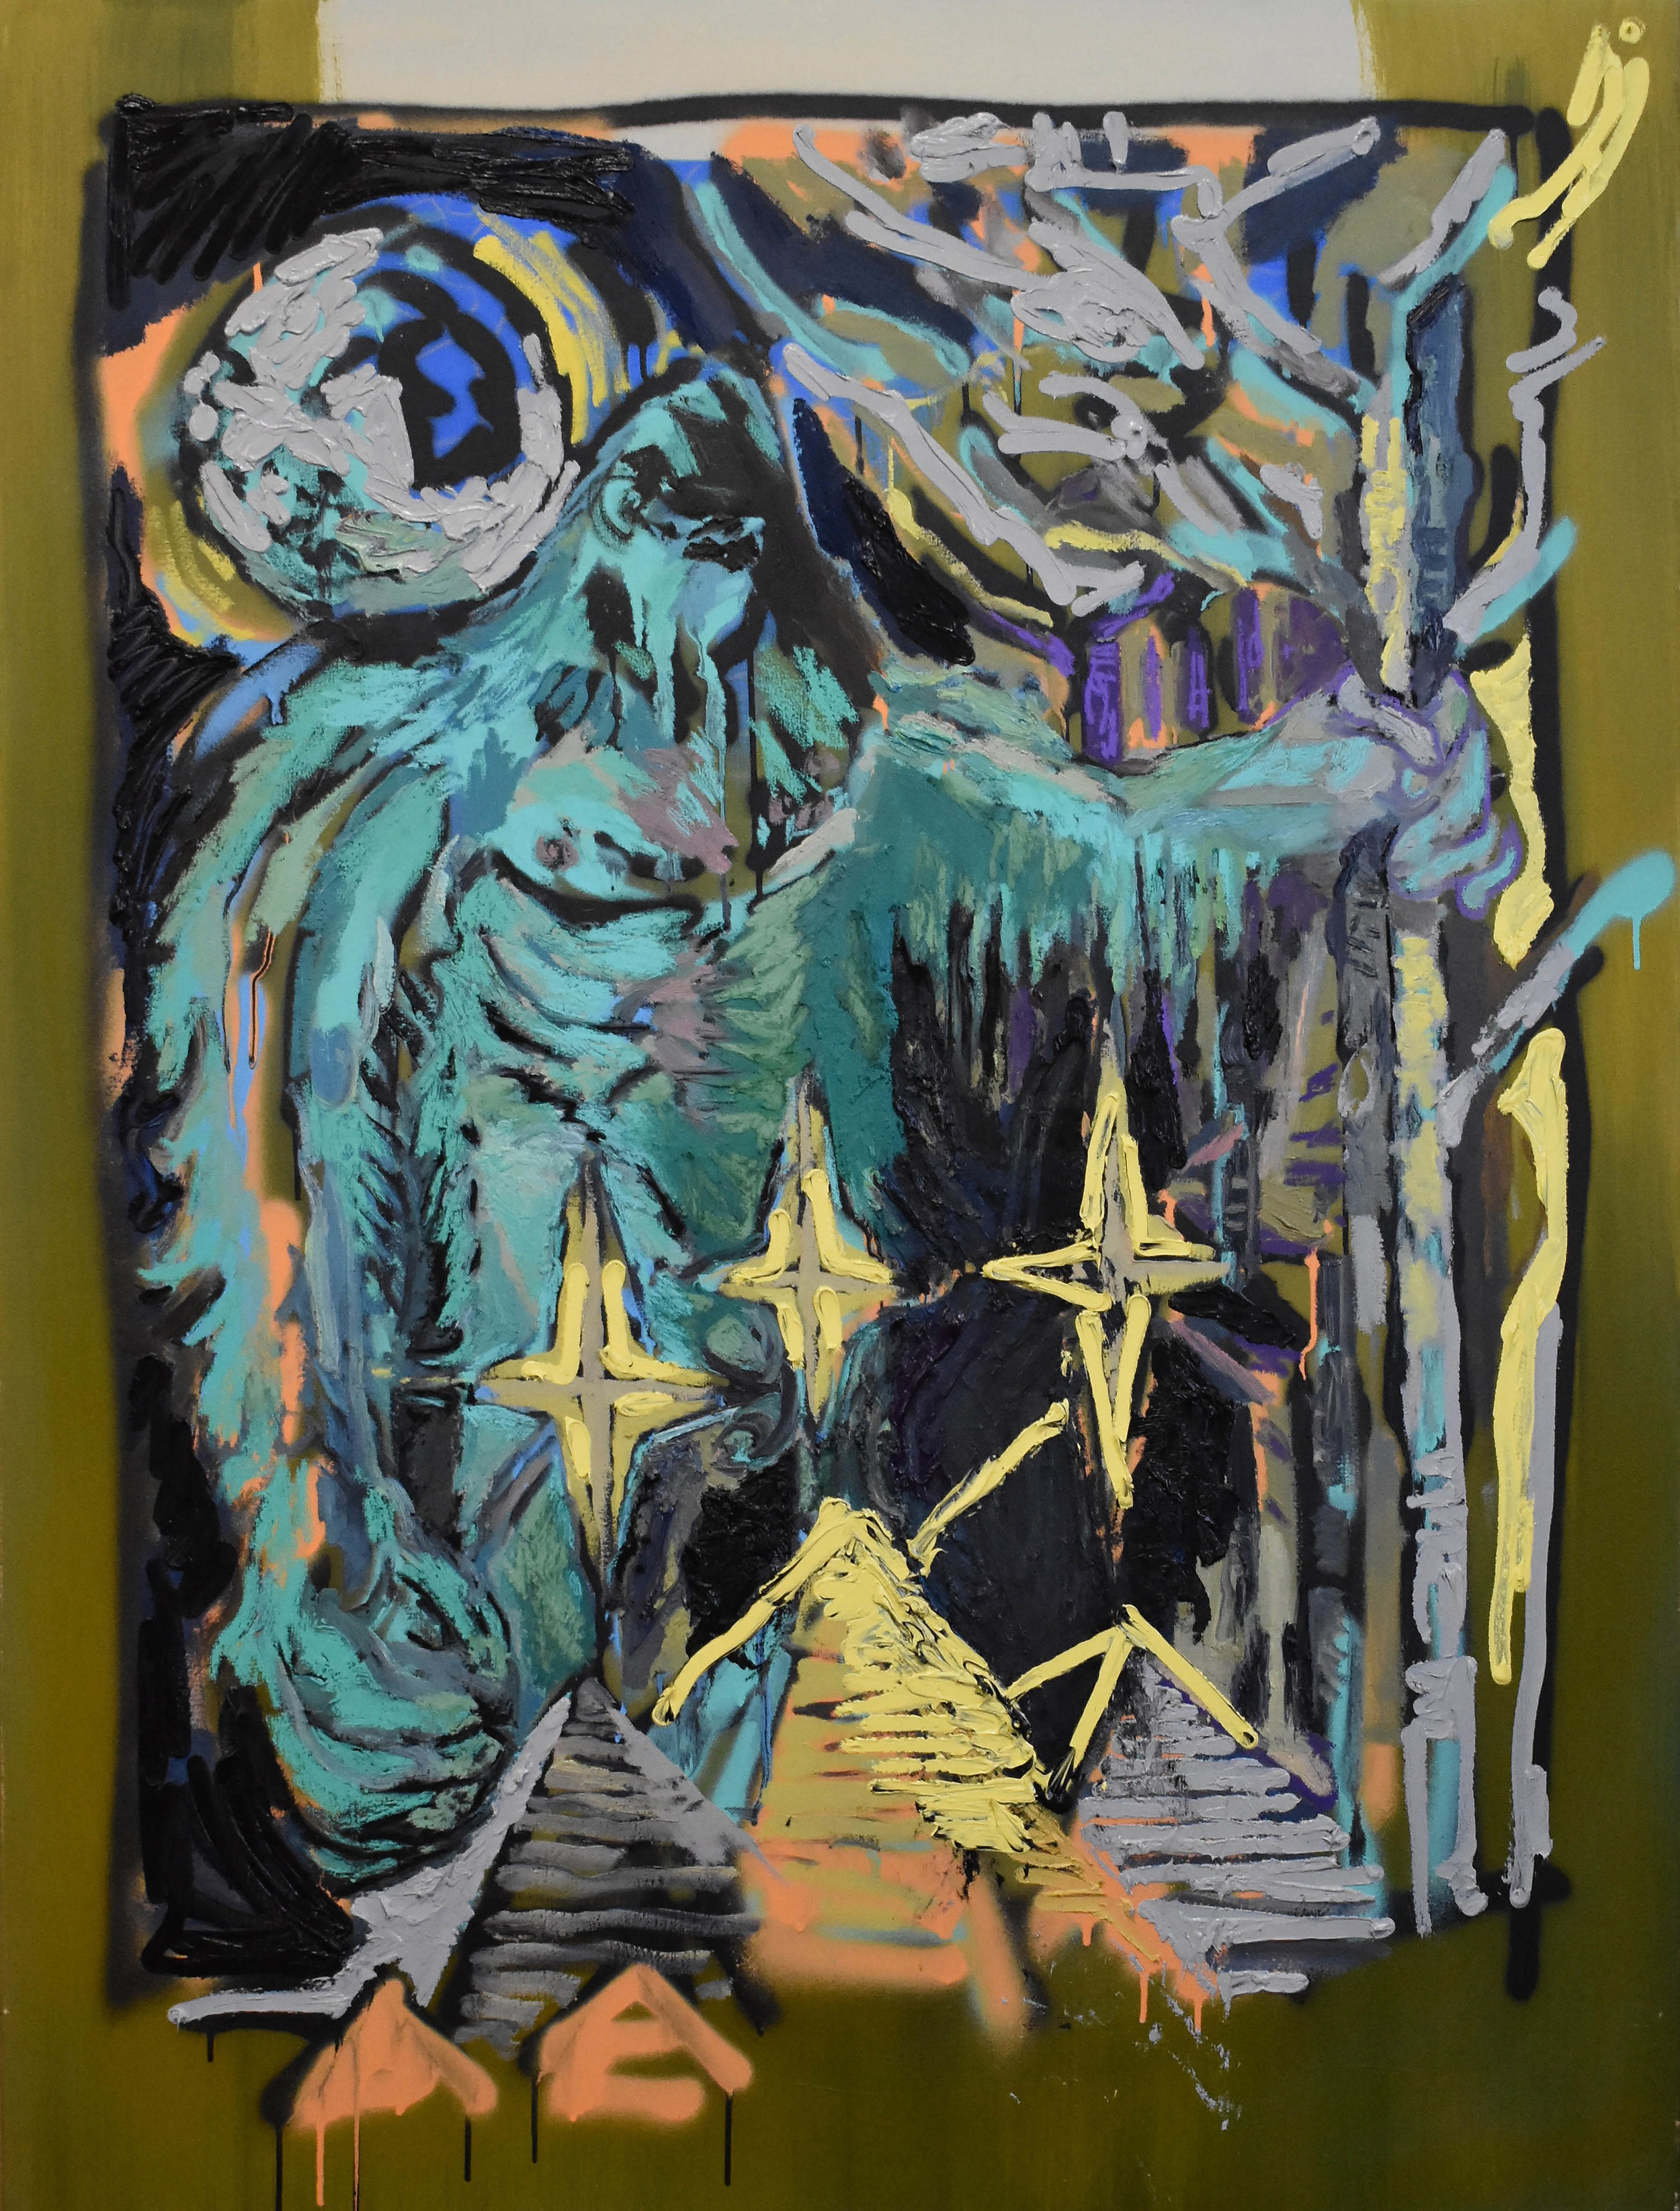 Sasquatch with Pyramids in Planetary Alignment / Exceptional @ Collyer Bristow Gallery, London / 2018